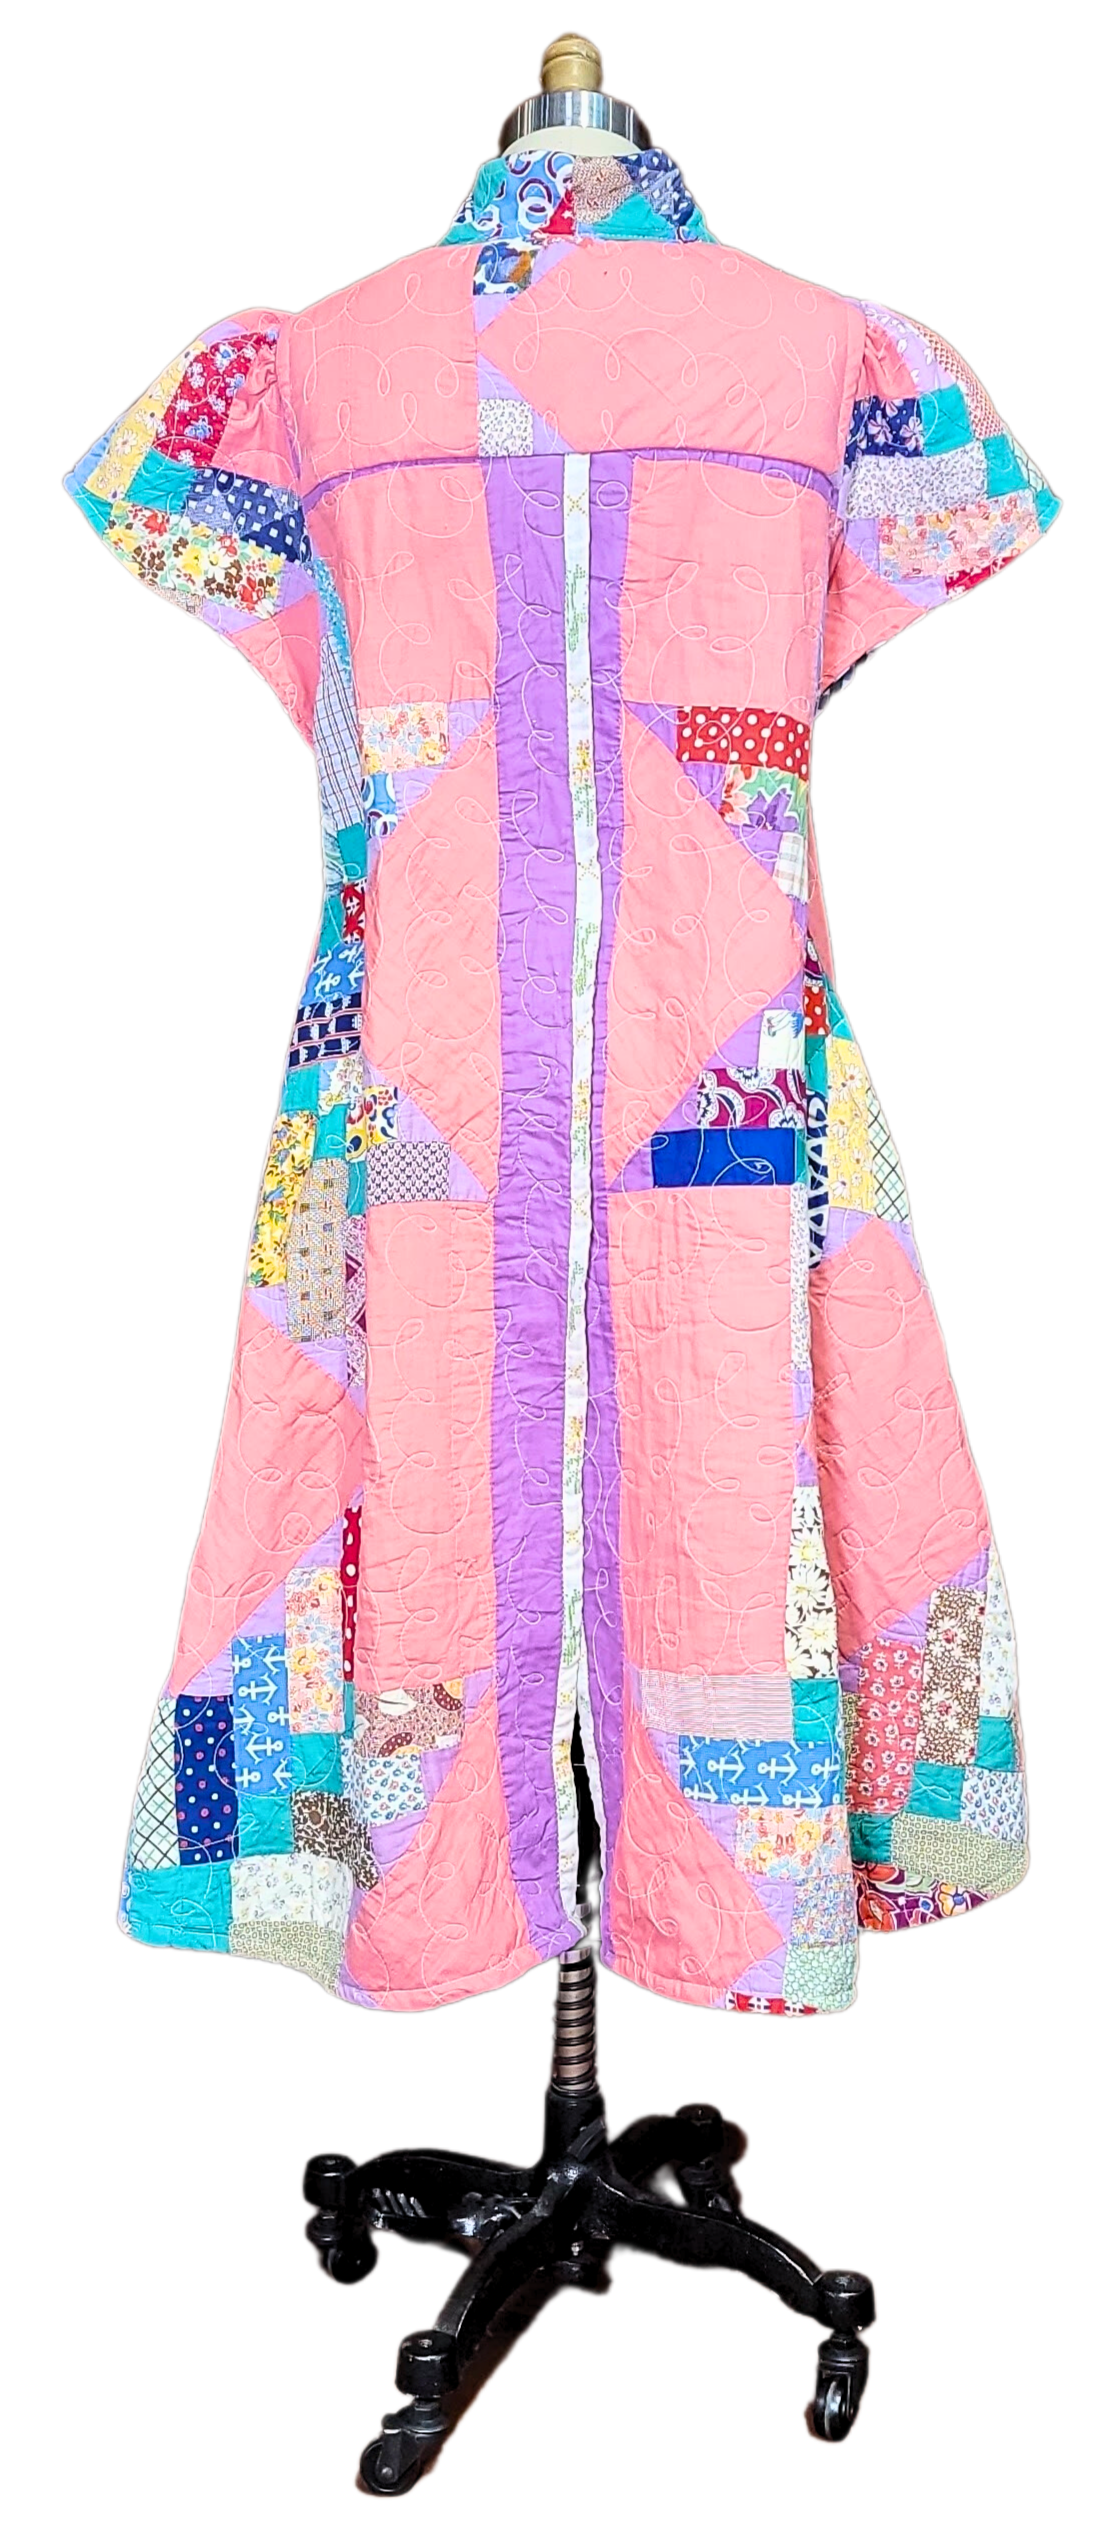 Vintage Quilt Jacket - All Season Split Back with Hi-Low Hemline - Pink & Patchwork with Puffy Cap Sleeve